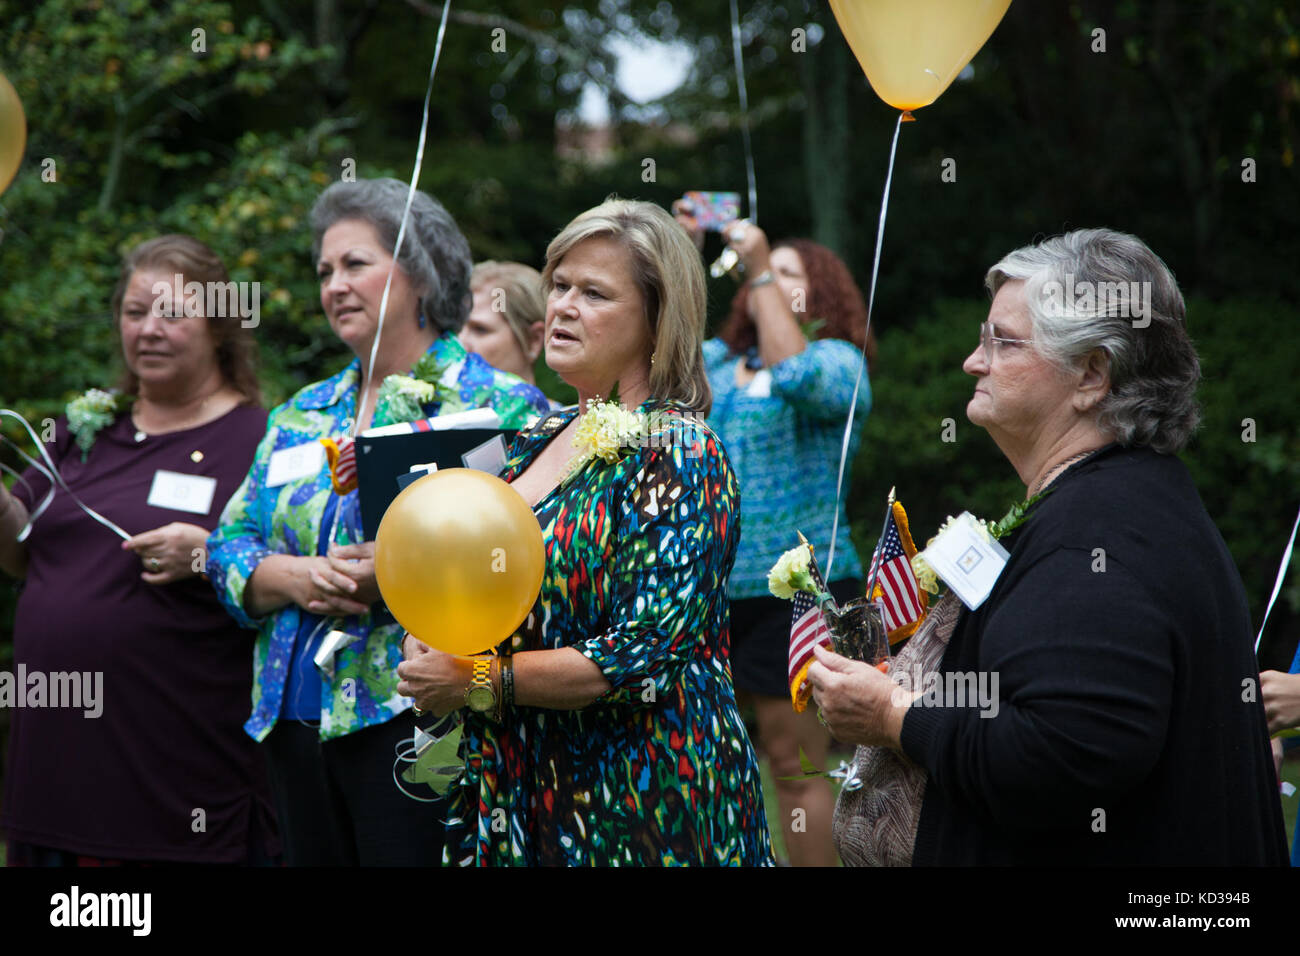 Gold Star Mothers and Families were honored during a gathering at the S.C. Governor’s Mansion Complex, Sept. 26, 2015. U.S. Army Brig. Gen. Roy V. McCarty, deputy adjutant general for the S. C. National Guard, served as guest speaker for the event, which was organized by the Survivor Outreach Services of the South Carolina National Guard and Ft. Jackson. Stock Photo